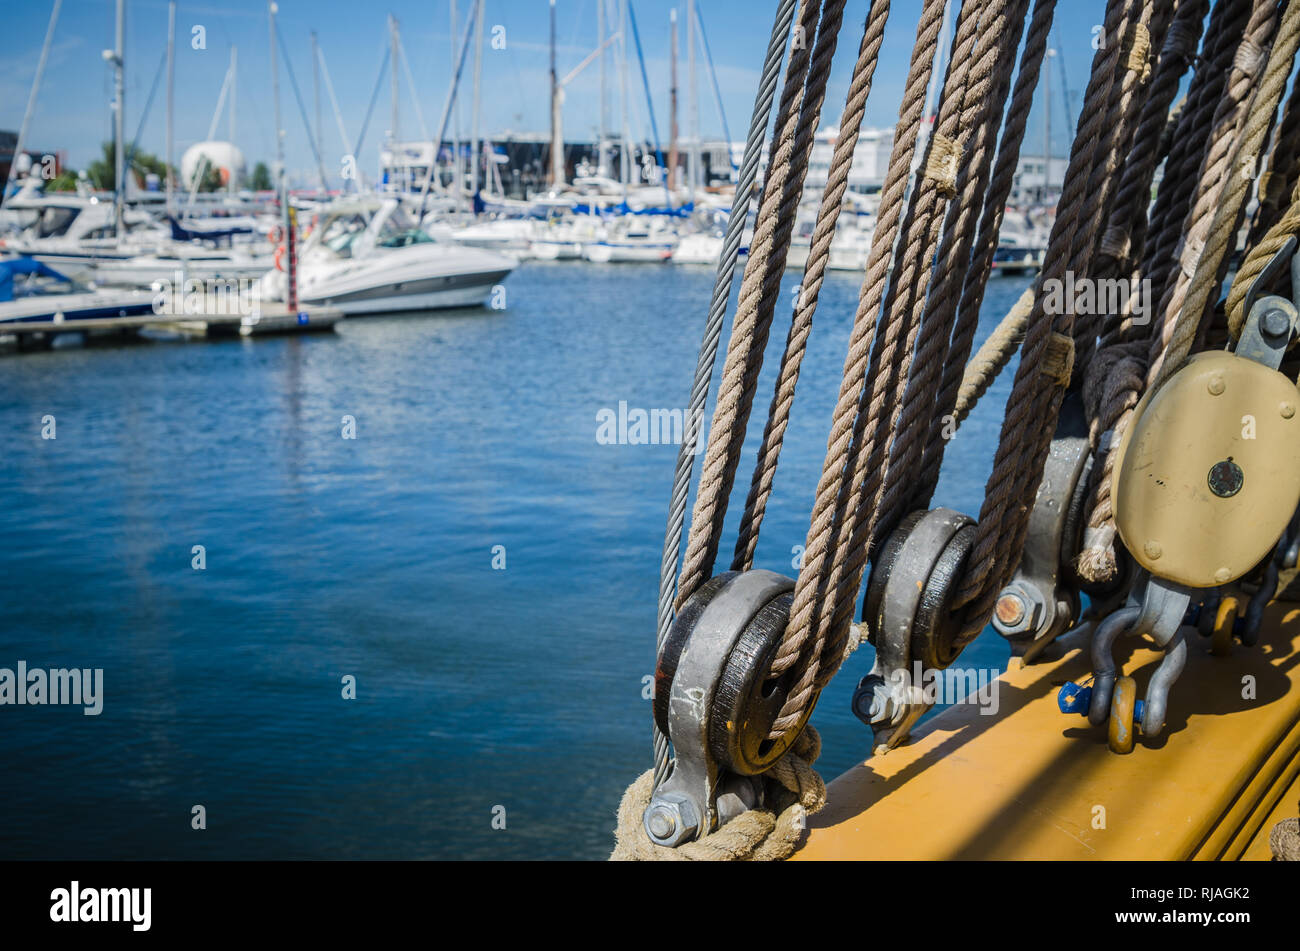 Rigging on the deck of an old sailing ship Stock Photo